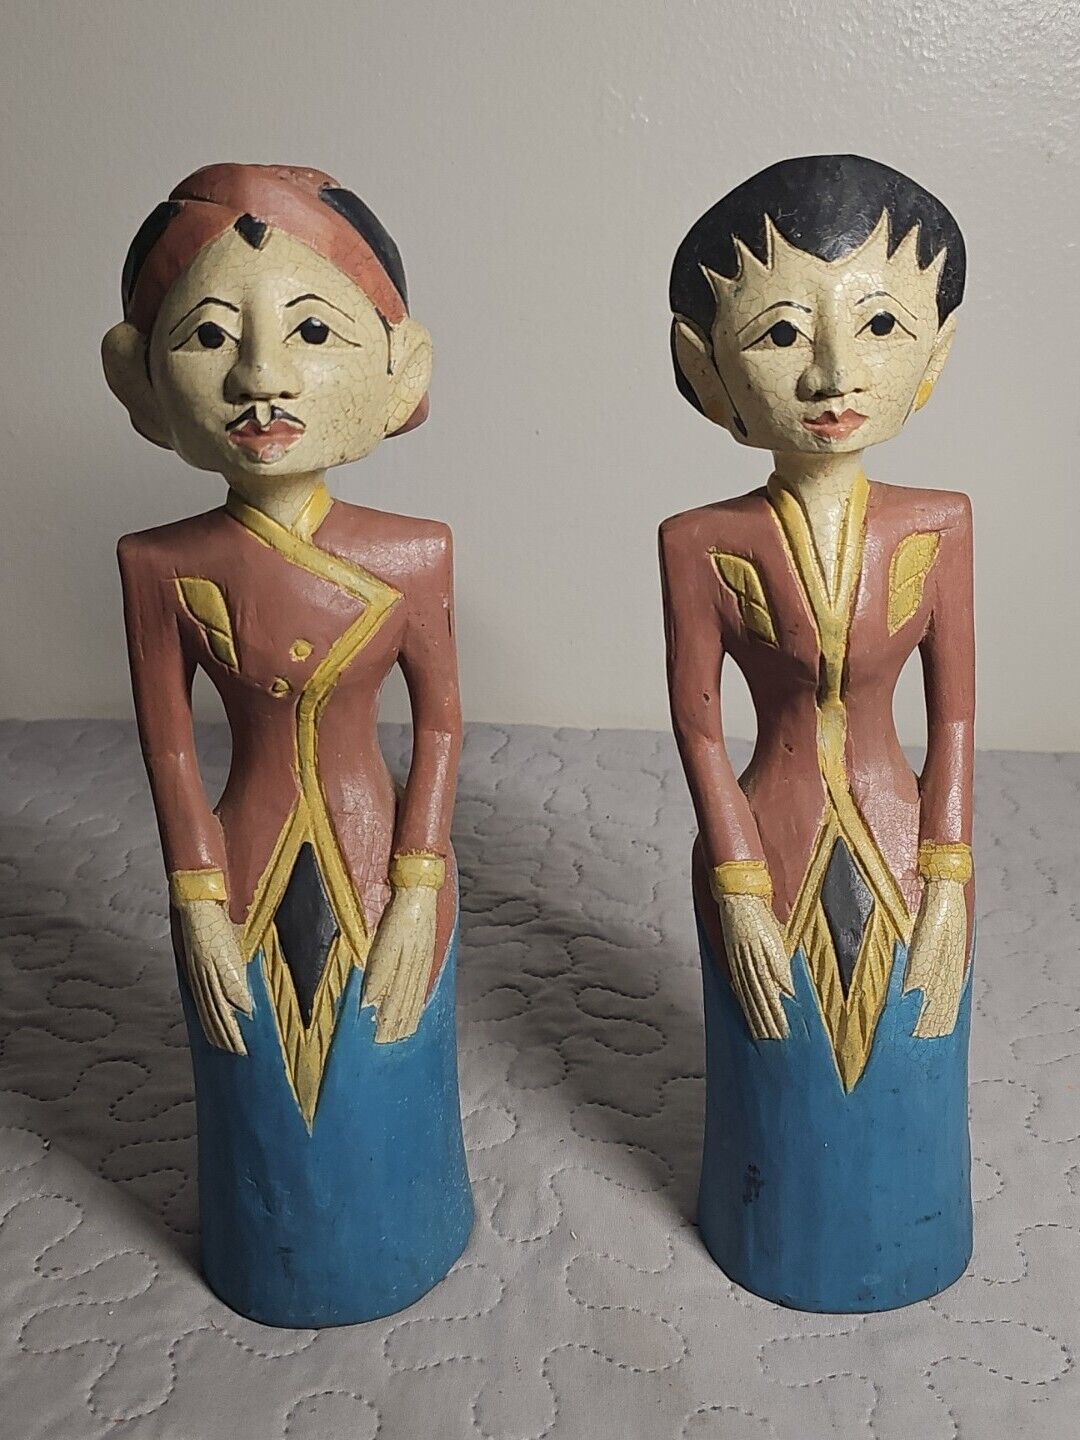 Antique Javanese Loro Blonyo Wooden Carved Wedding Figures 12” Tall